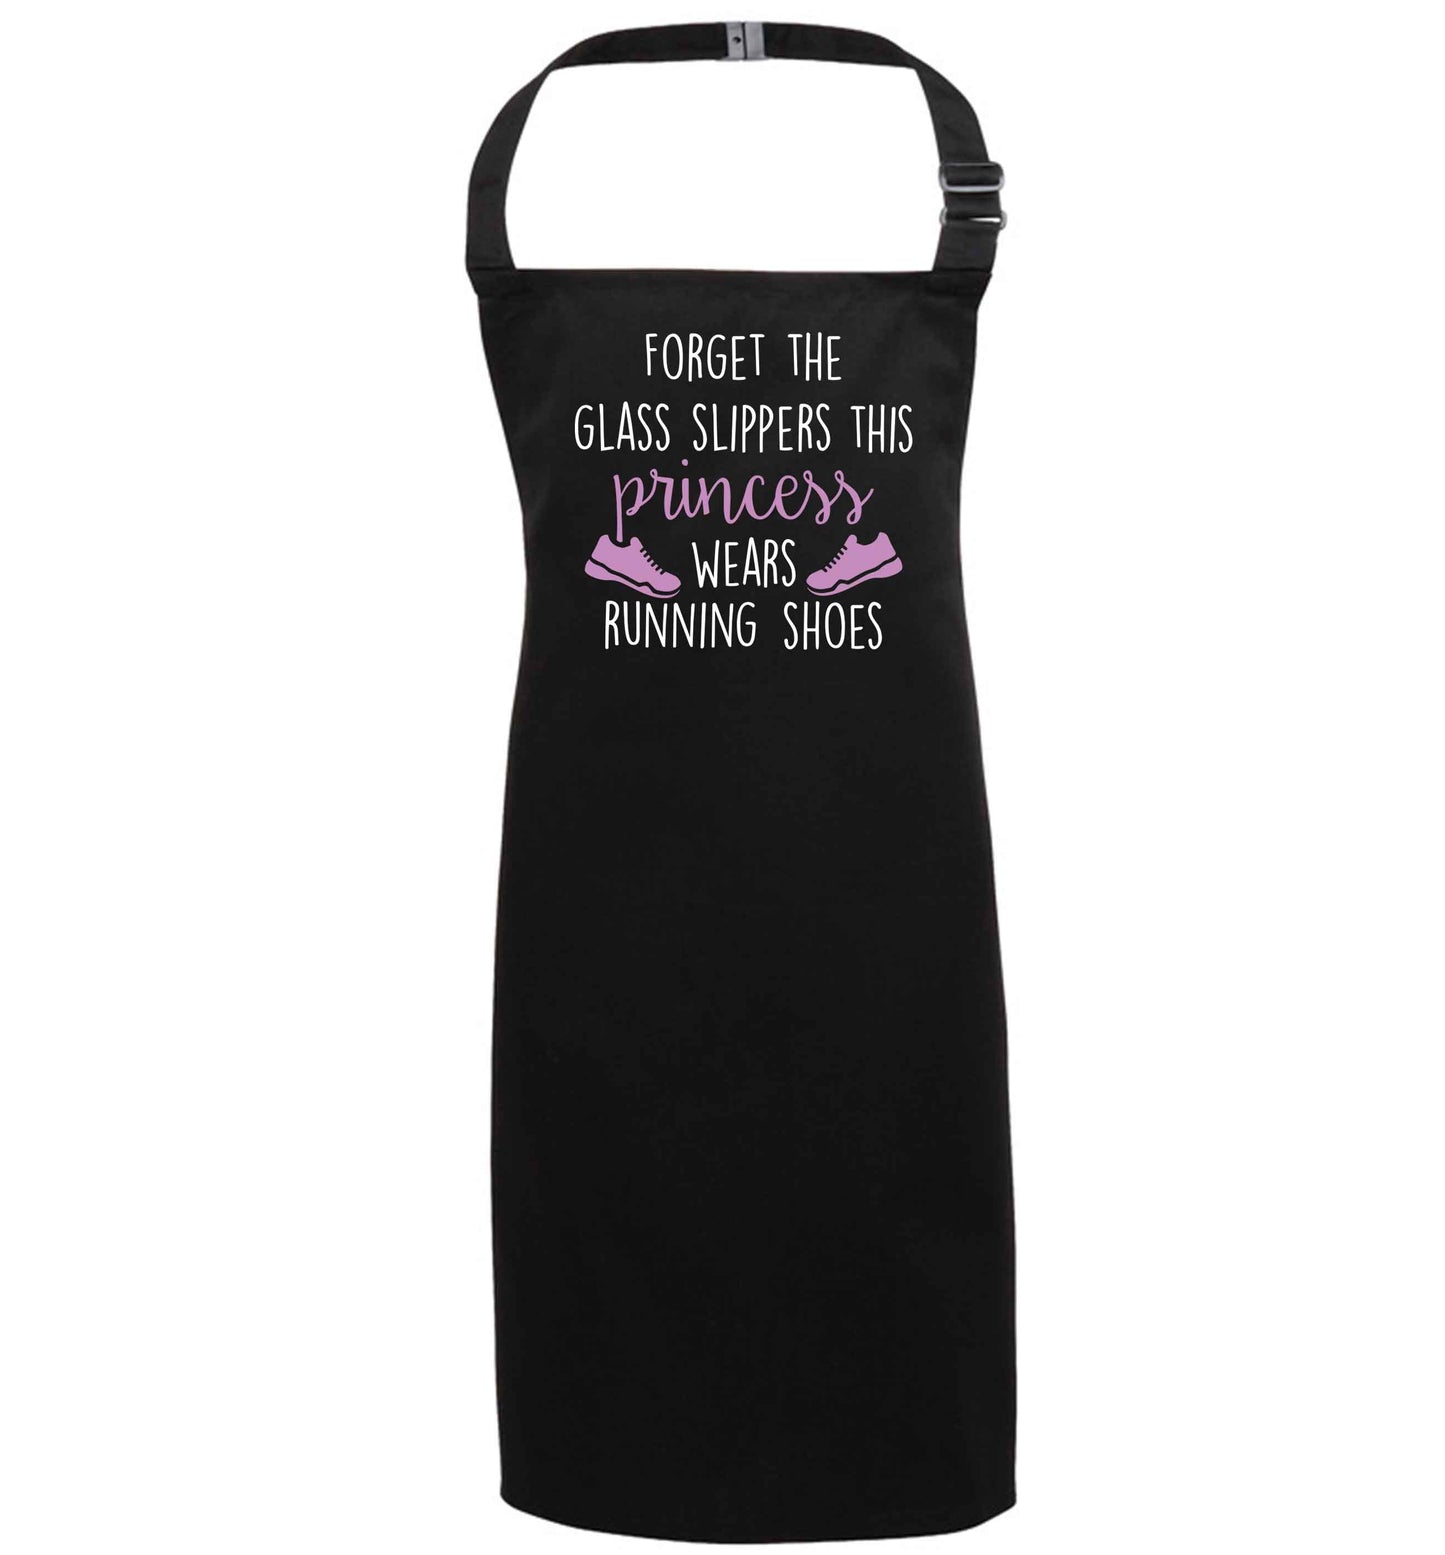 Forget the glass slippers this princess wears running shoes black apron 7-10 years